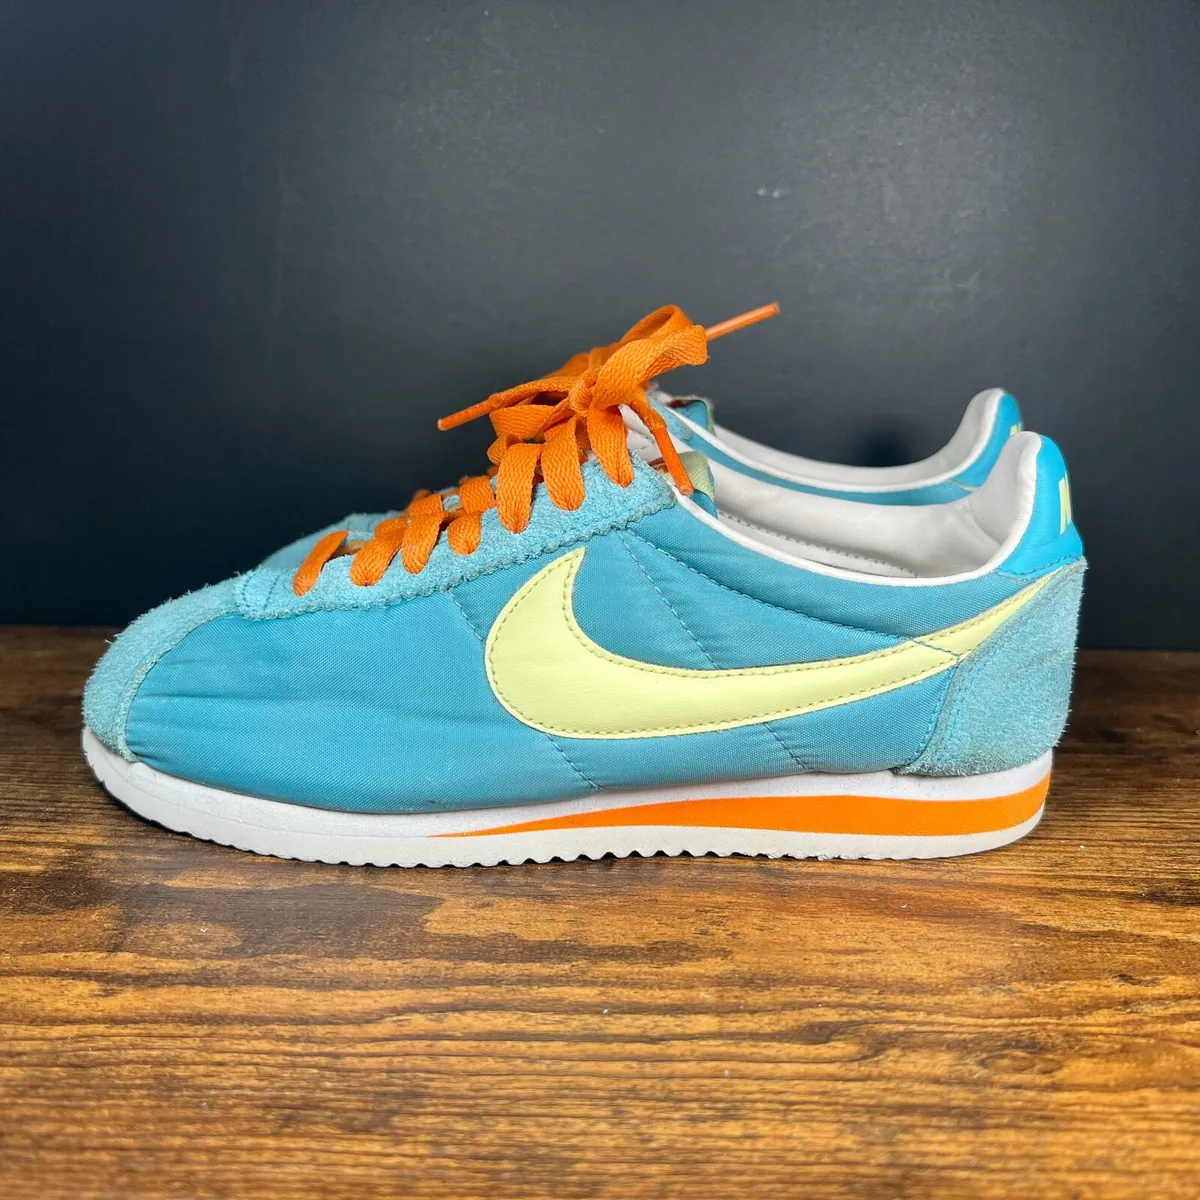 Nike Classic Cortez Shoes Womens Size 5.5 Teal Orange White Low Top Sneakers